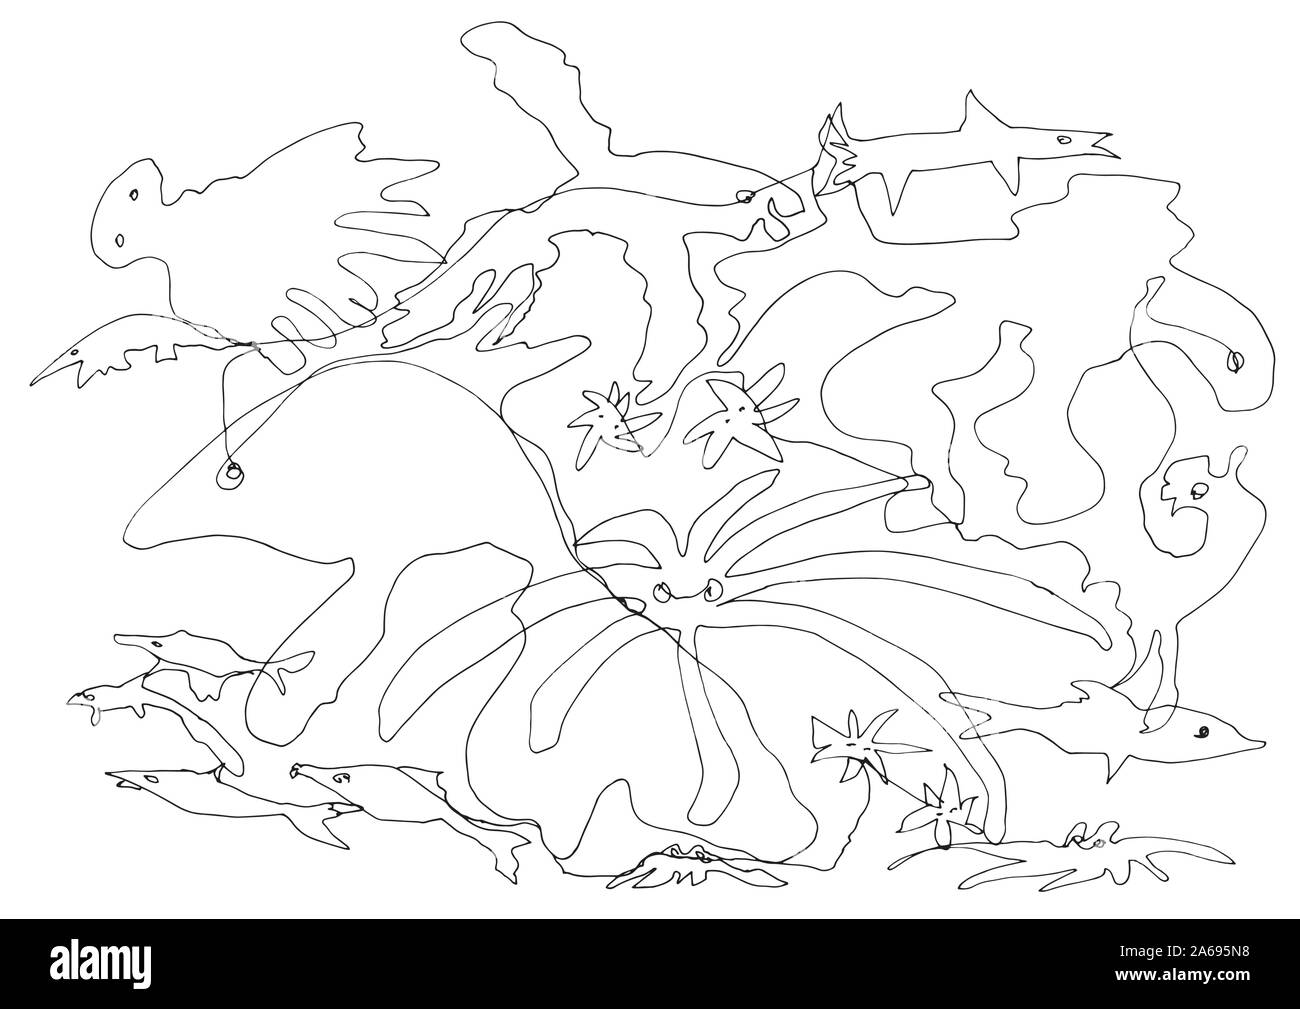 A unique line art drawing underwater life. Ready to color decorative work of art can be used as a greeting card, background, decorative fabric pattern. Stock Vector